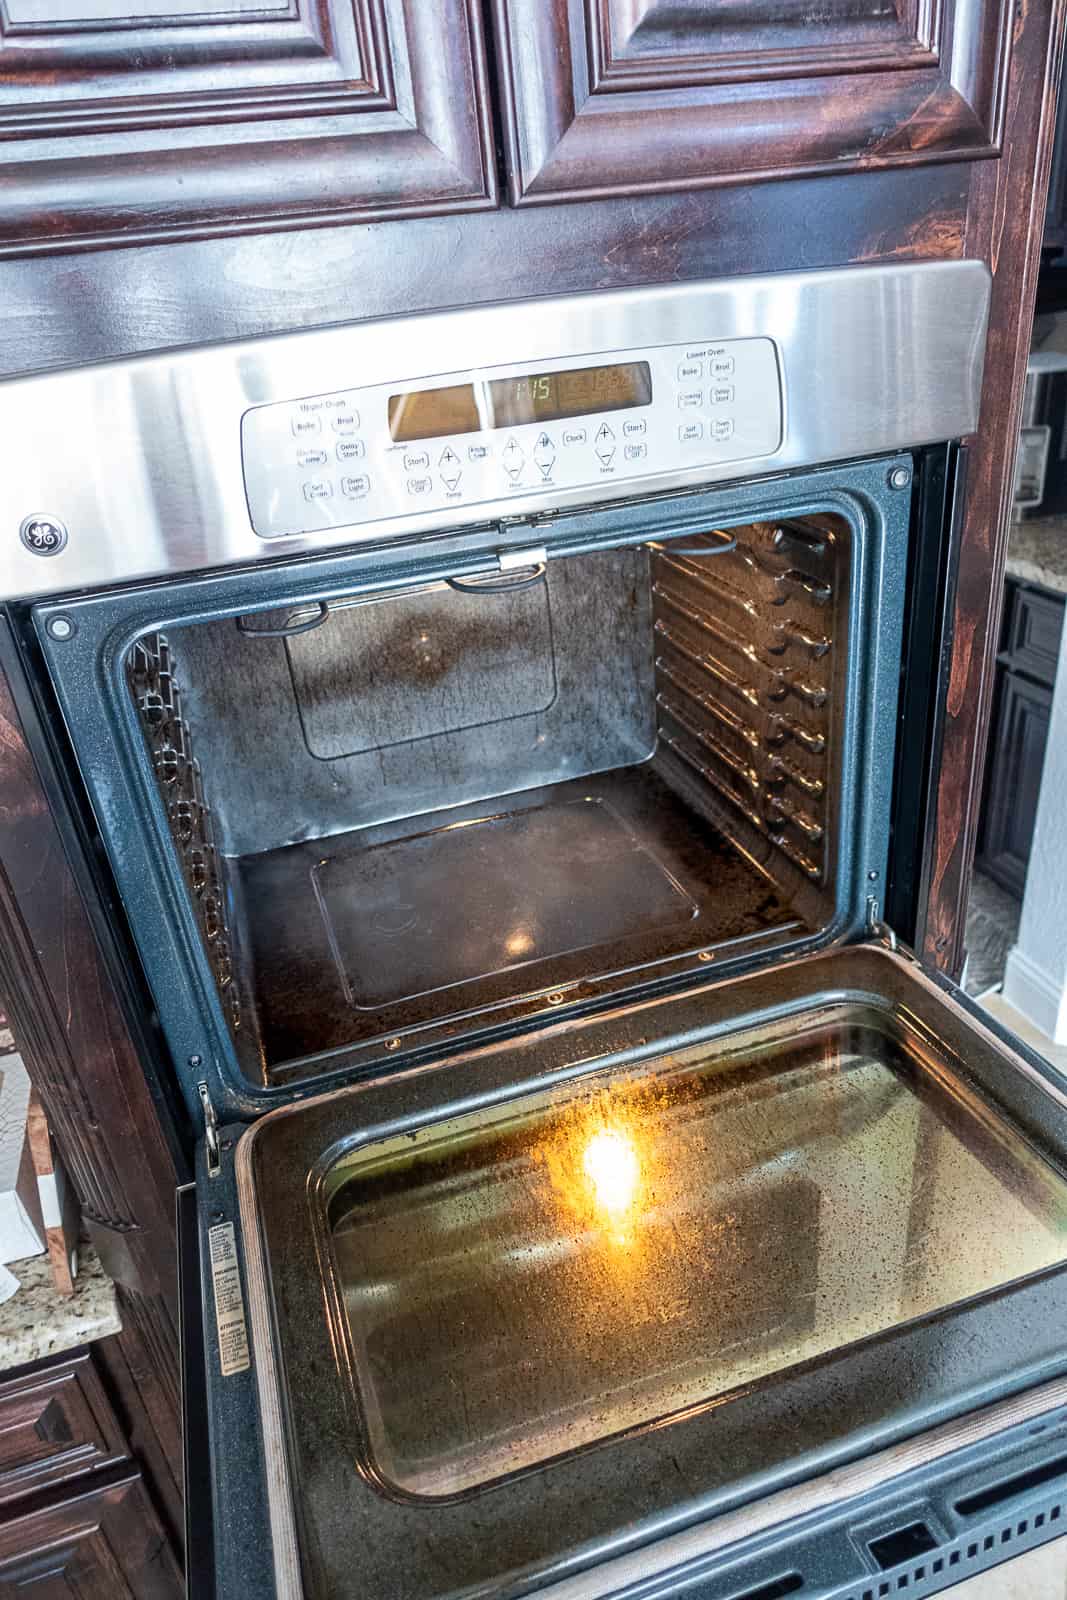 Dirty oven with grease